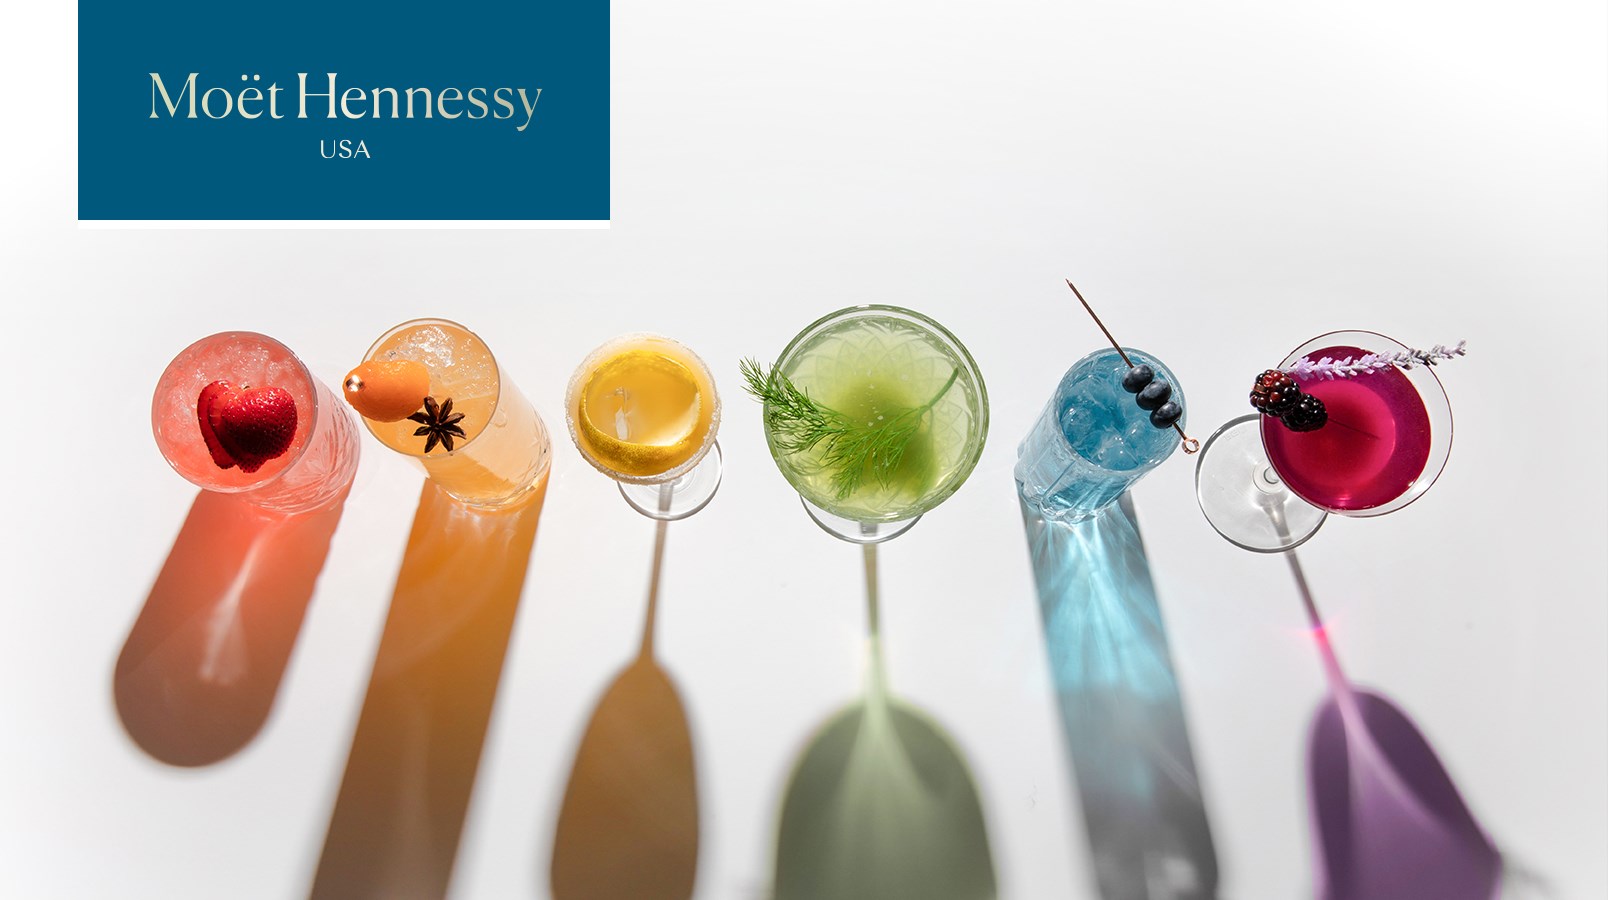 WSET Americas partners with Moet Hennessy in honour of pride month